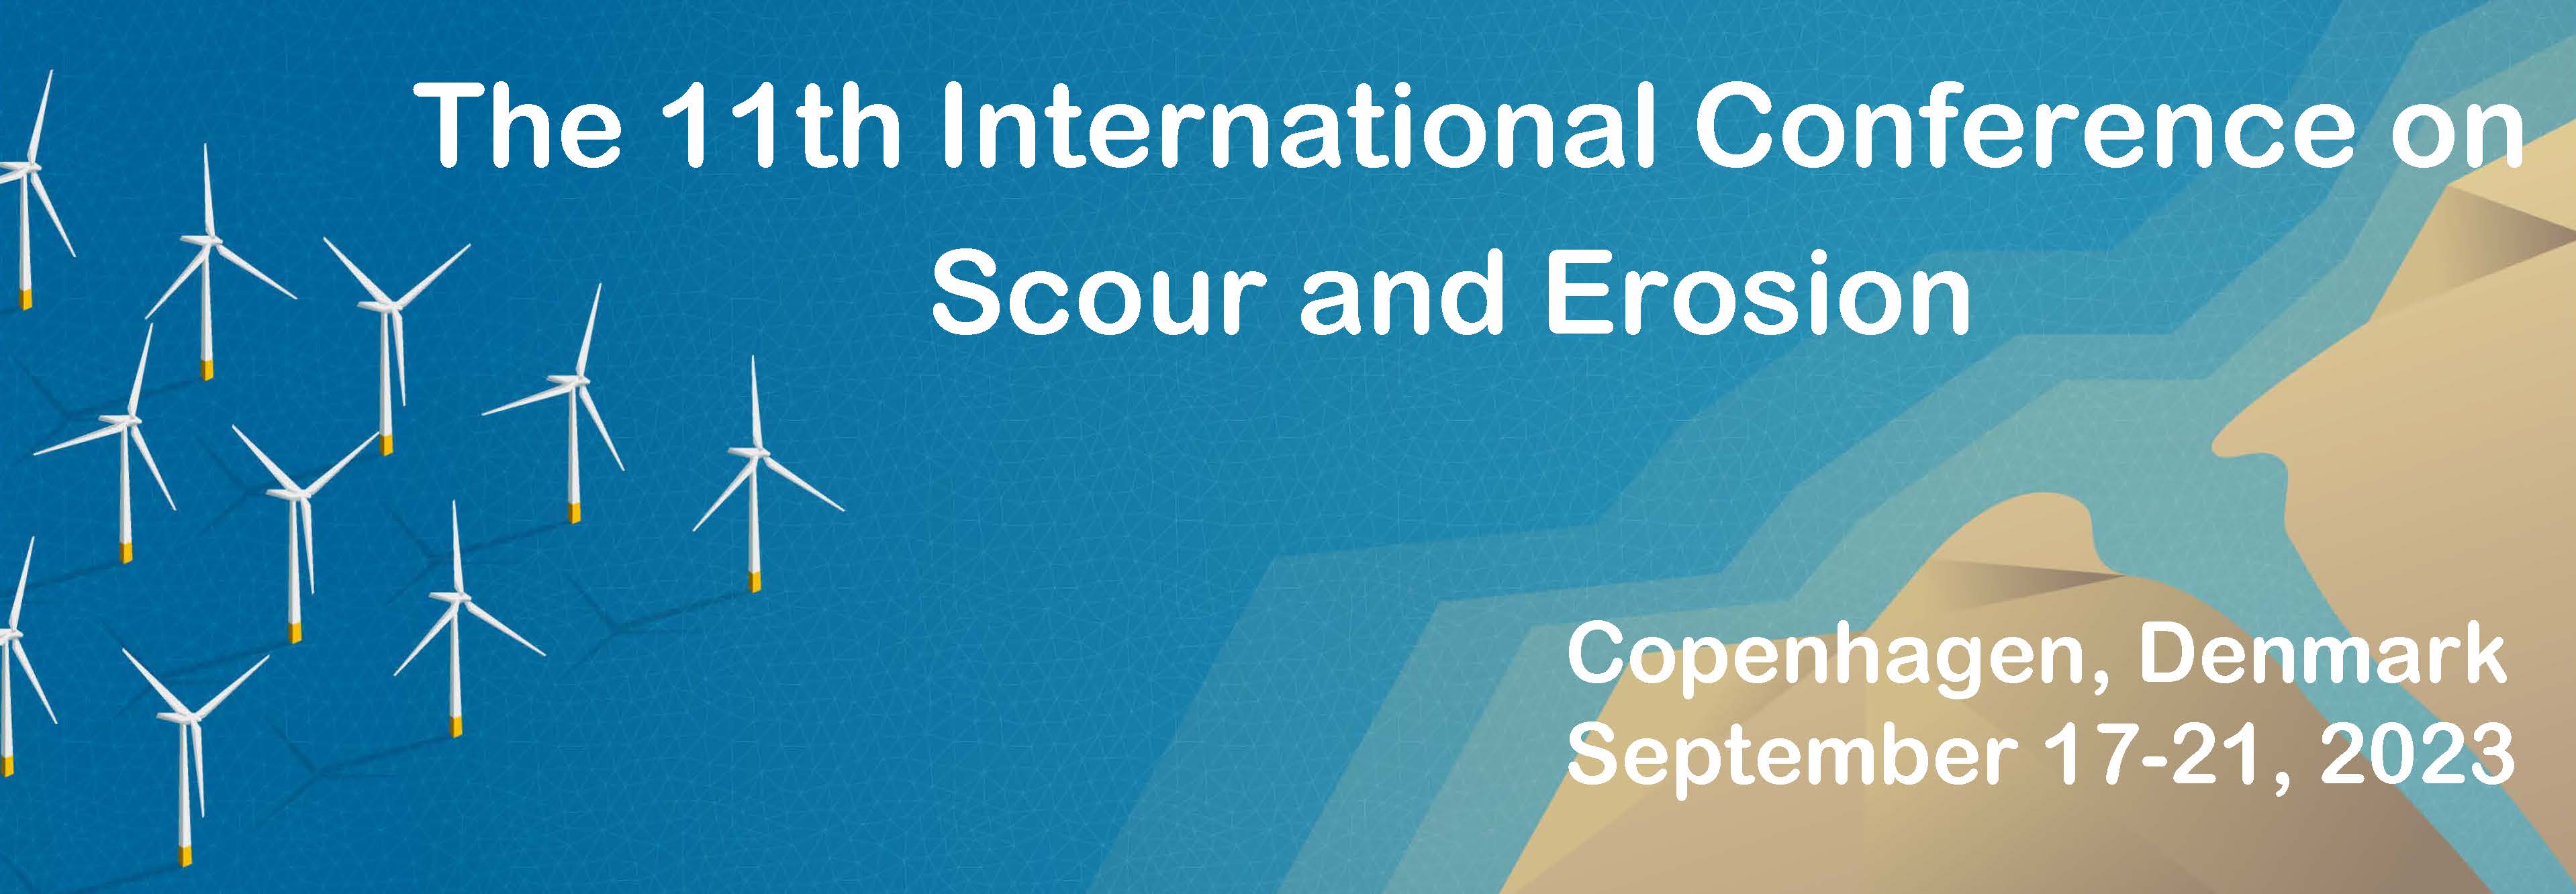 11th International Conference on Scour and Erosion (ICSE-11)